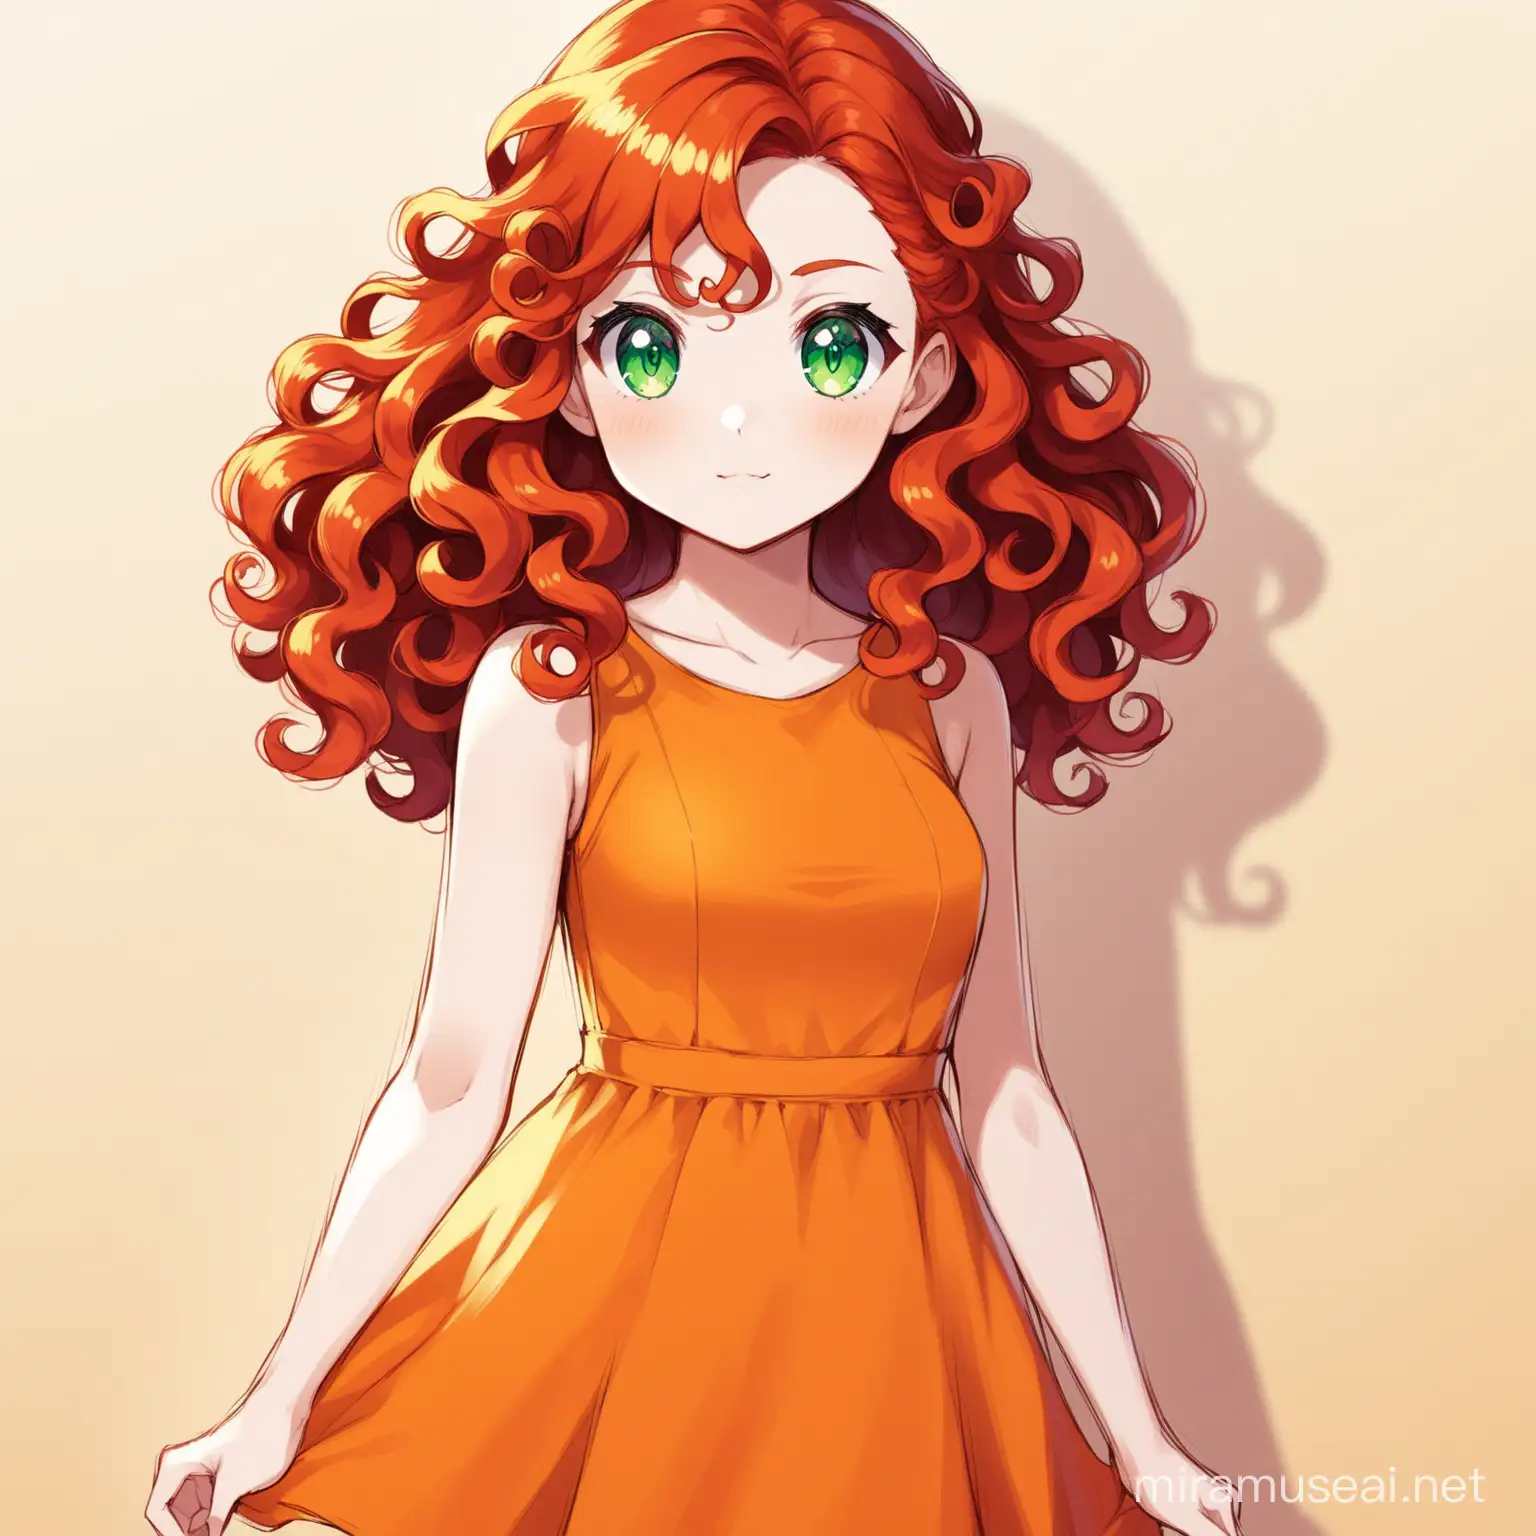 Pokemon style, red curly haired, young girl, green eyes, orange dress